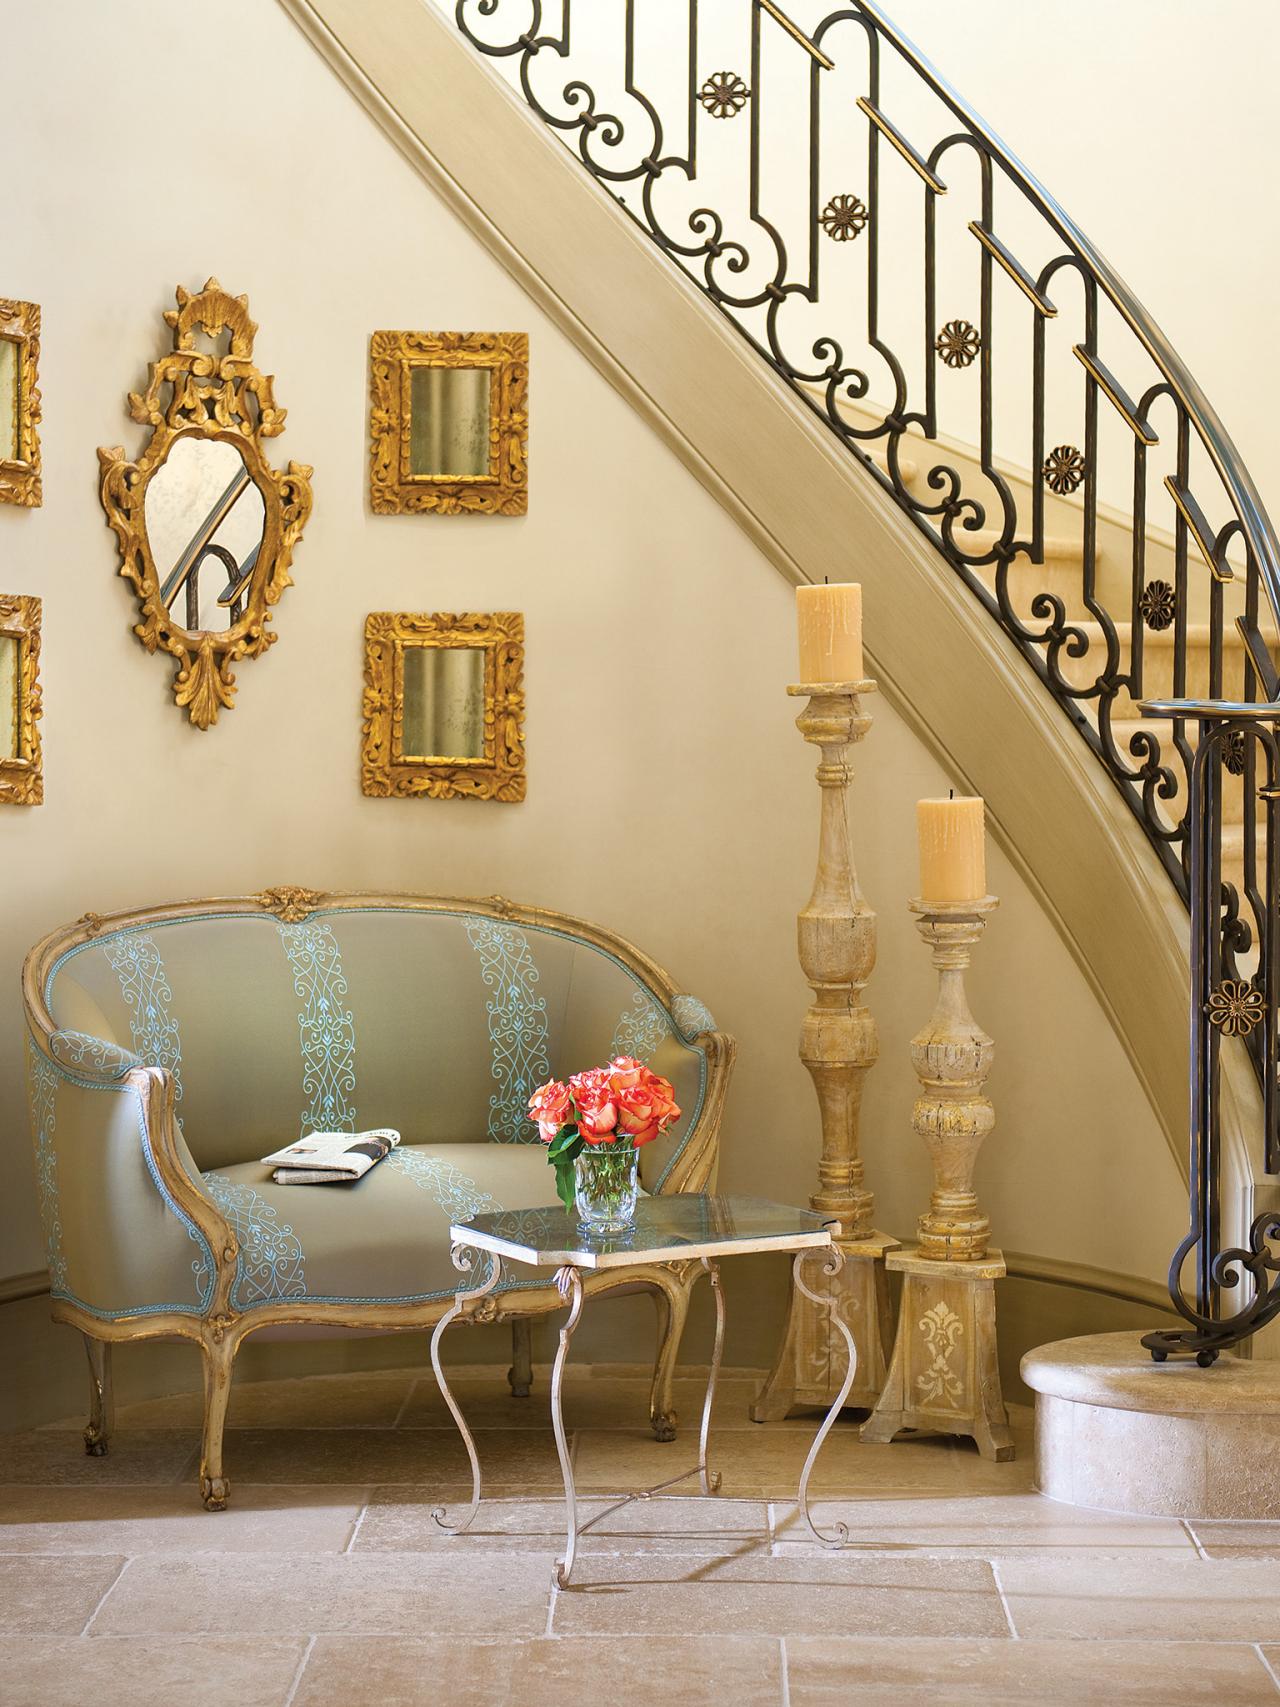 Italian Iron Stair Railings Yahoo Image Search Results Stair